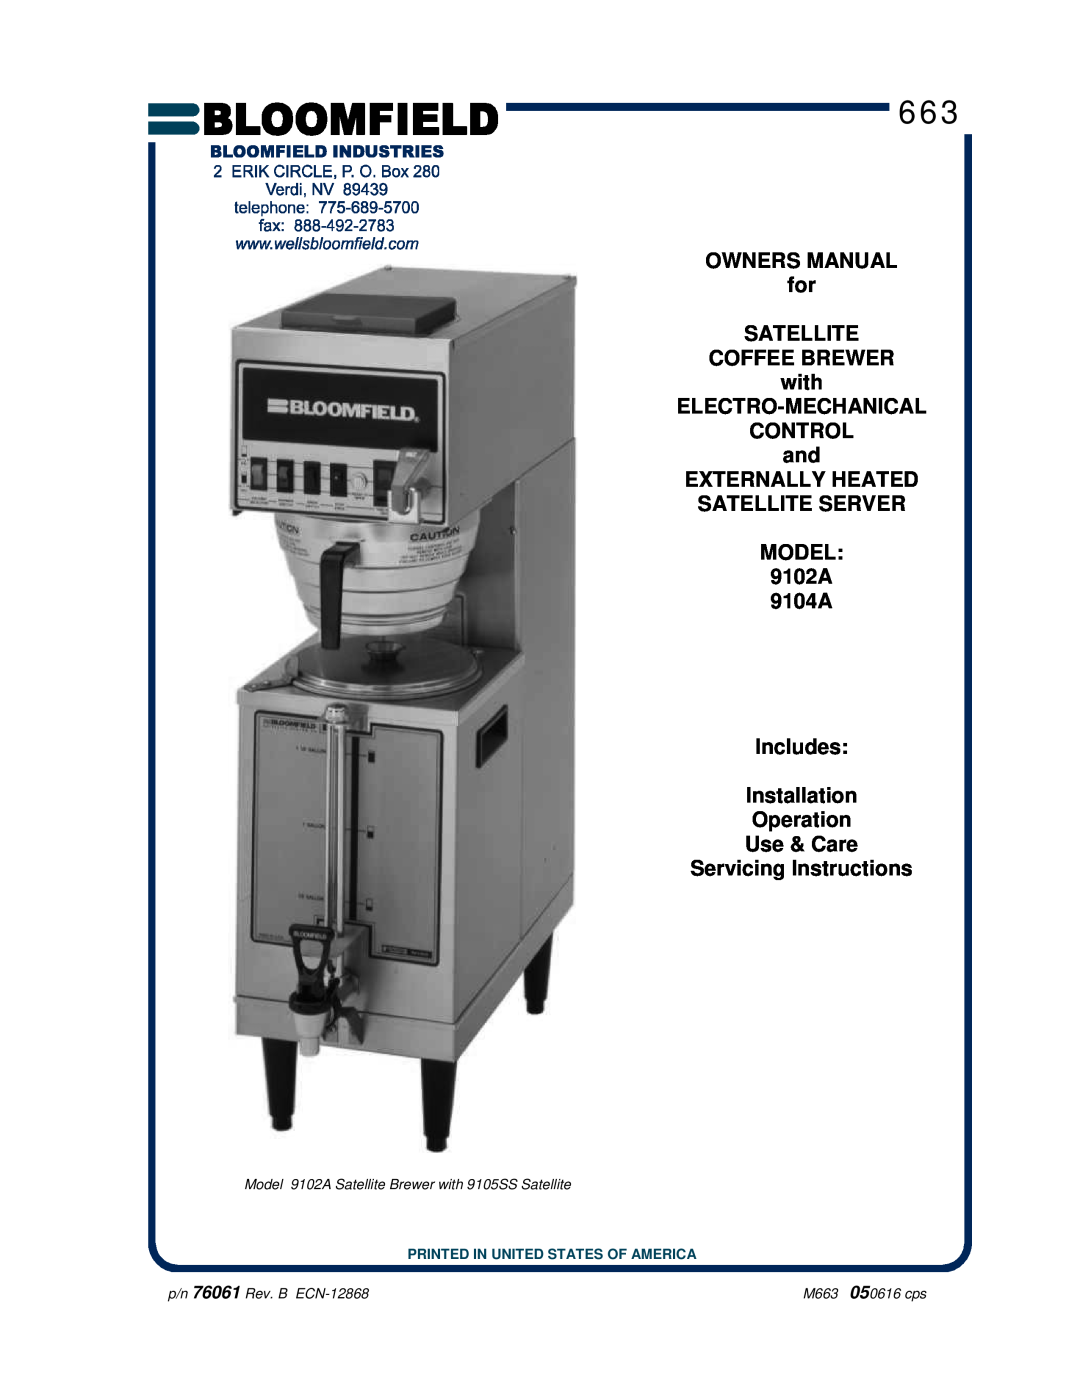 Bloomfield owner manual CONTROL and EXTERNALLY HEATED SATELLITE SERVER MODEL 9102A 9104A, p/n 76061 Rev. B ECN-12868 